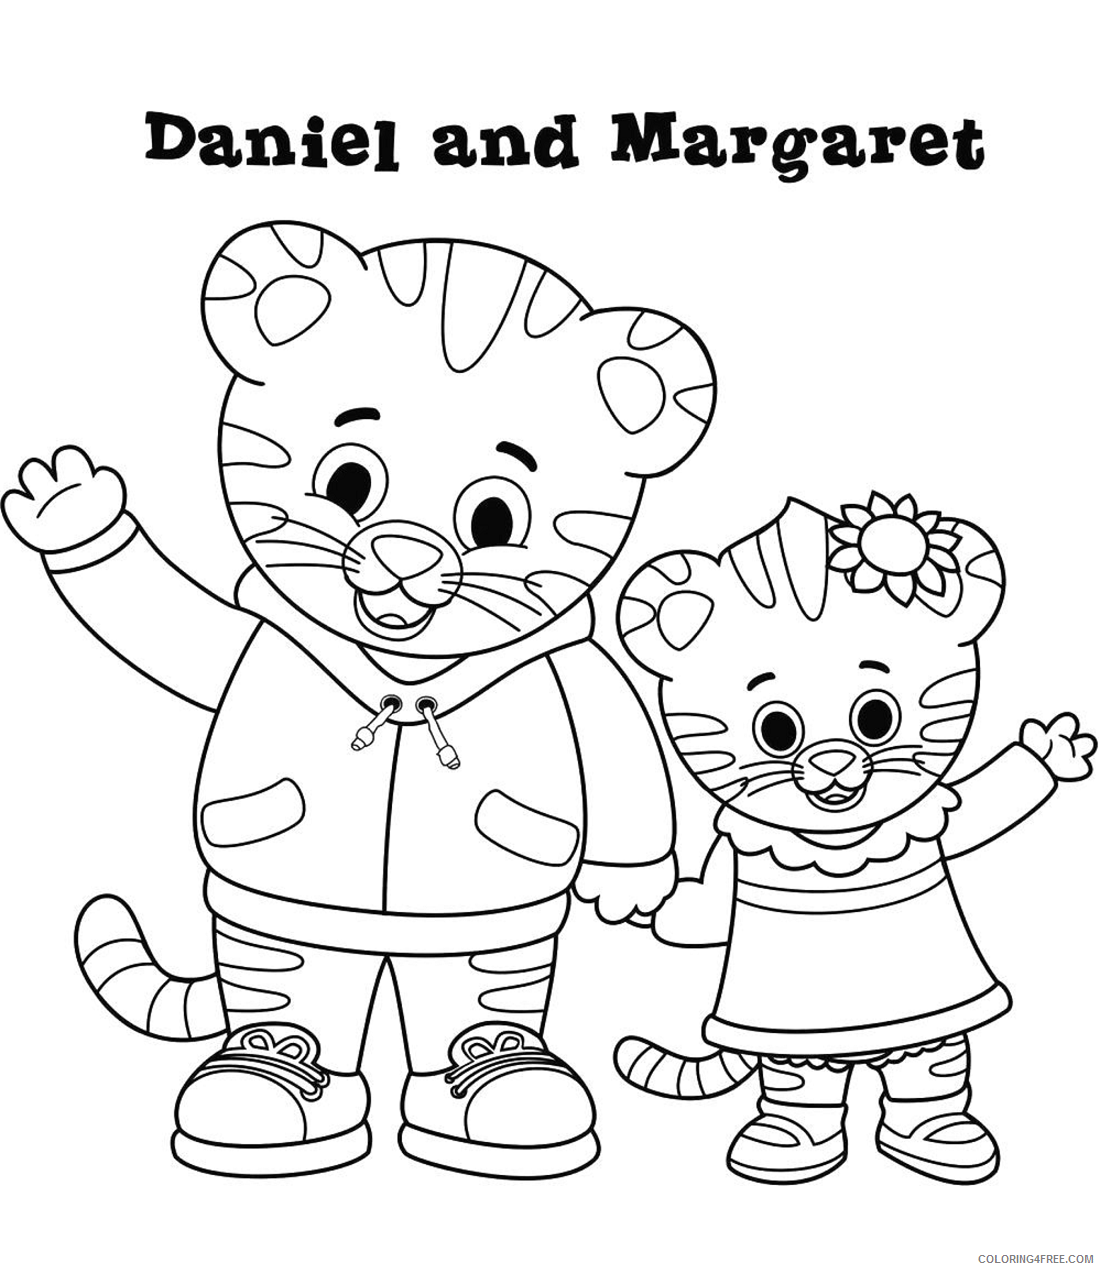 Daniel Tiger Coloring Pages TV Film daniel_and_margaret a4 Printable 2020 02334 Coloring4free